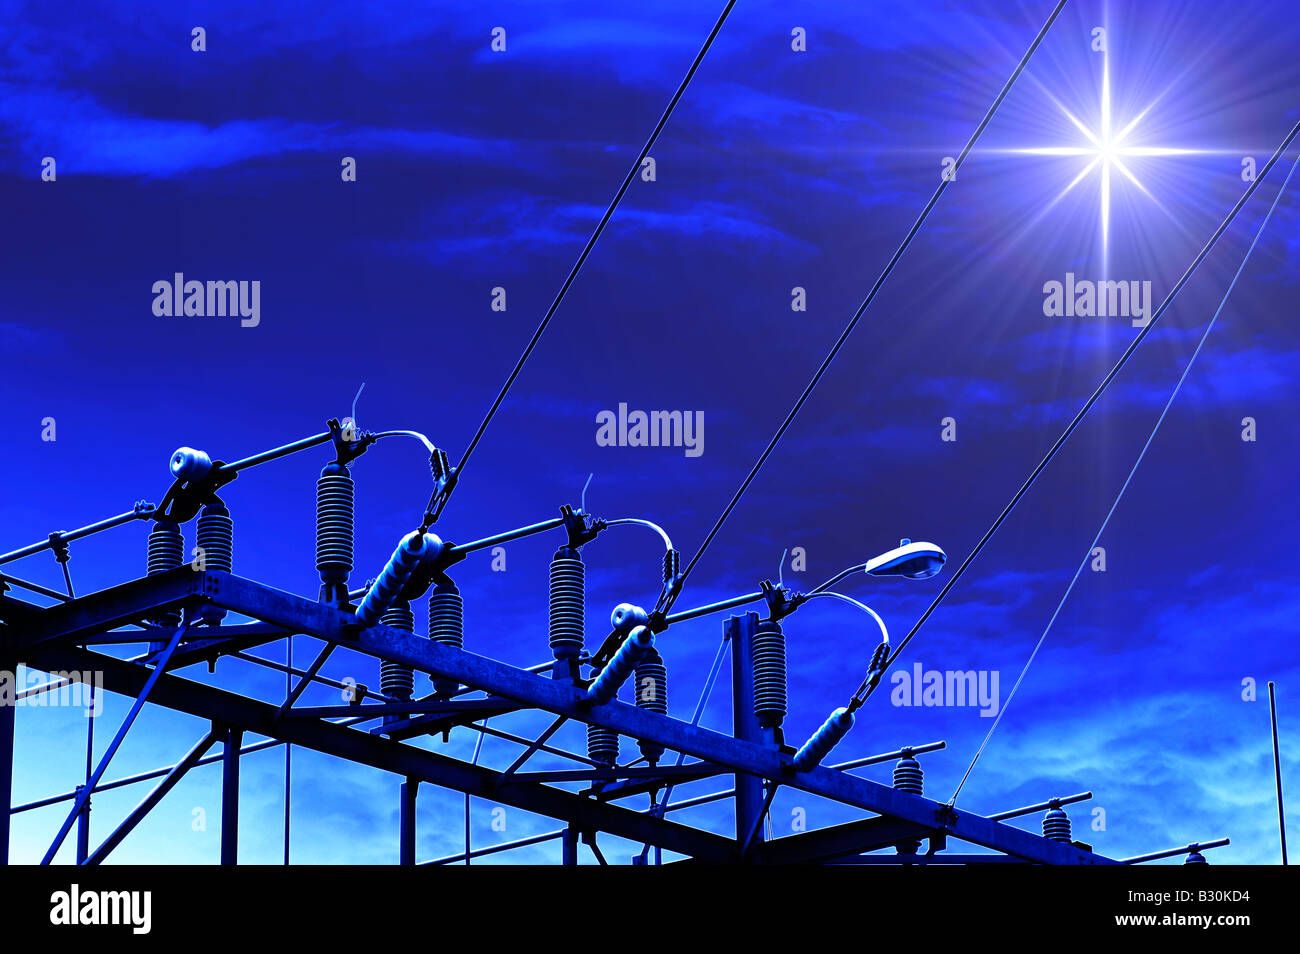 electric power station at night with evening star Stock Photo